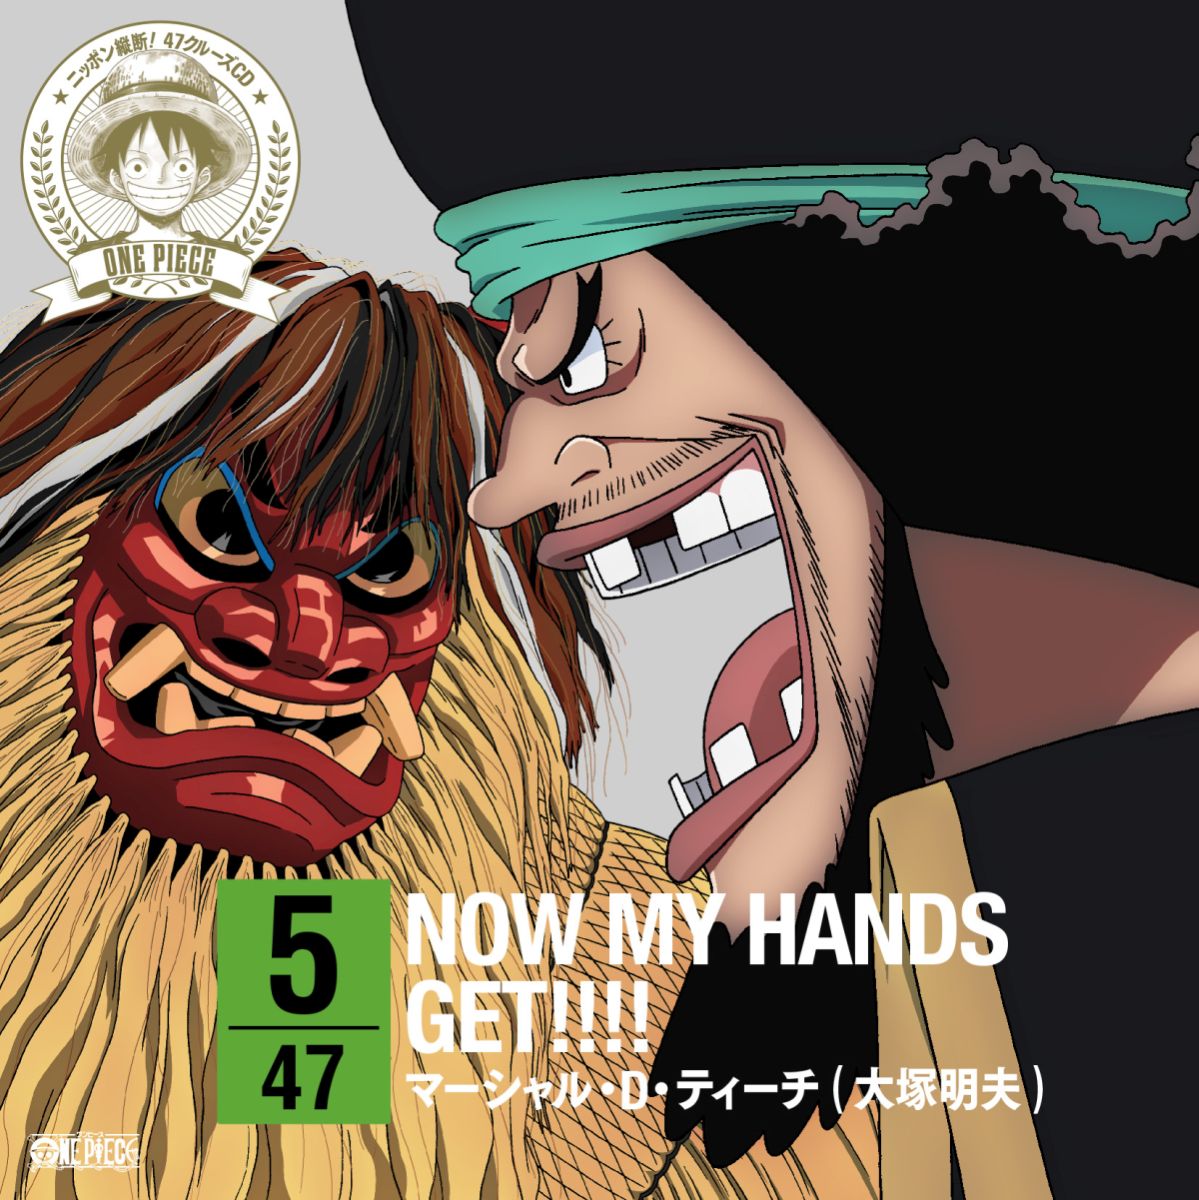 ONE PIECE ニッポン縦断! 47クルーズCD in 秋田 NOW MY HANDS GET!!!!